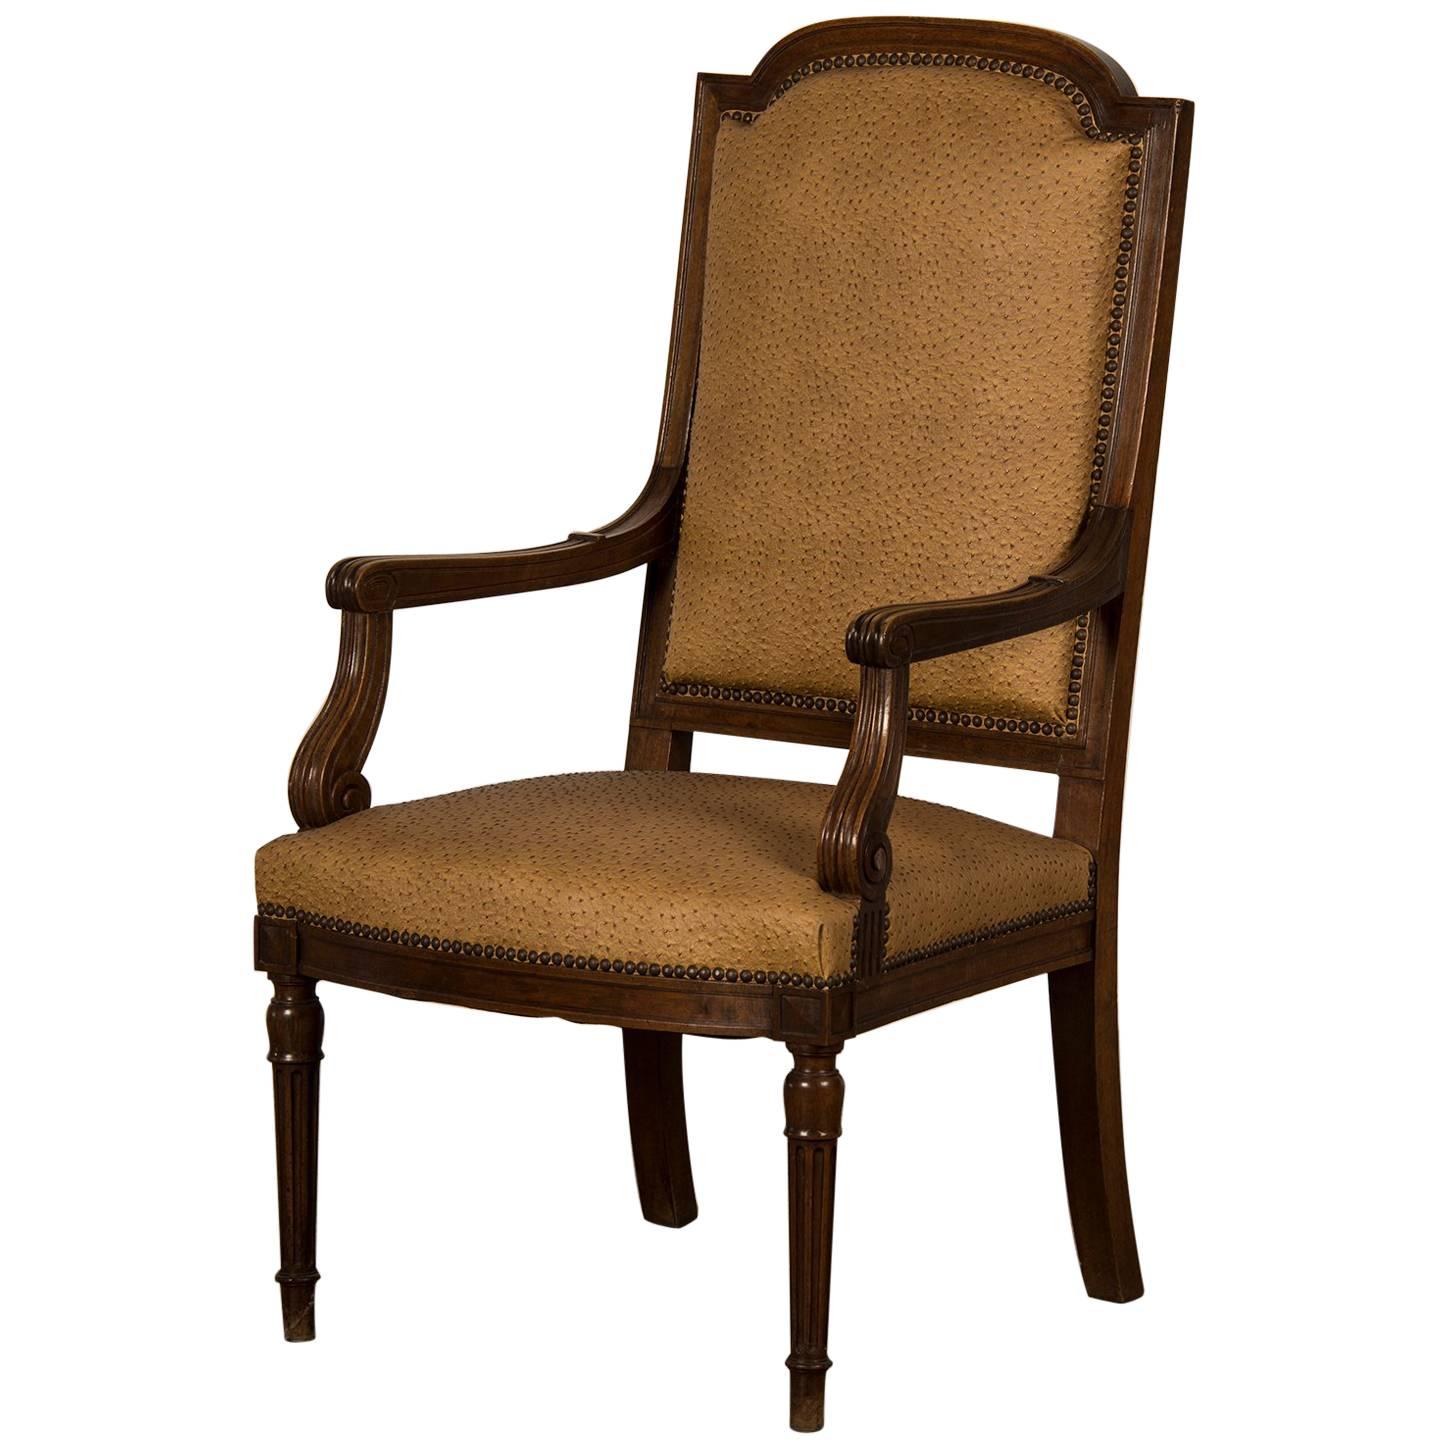 Large Antique French Louis XVI Style Walnut Fauteuil, circa 1860 For Sale